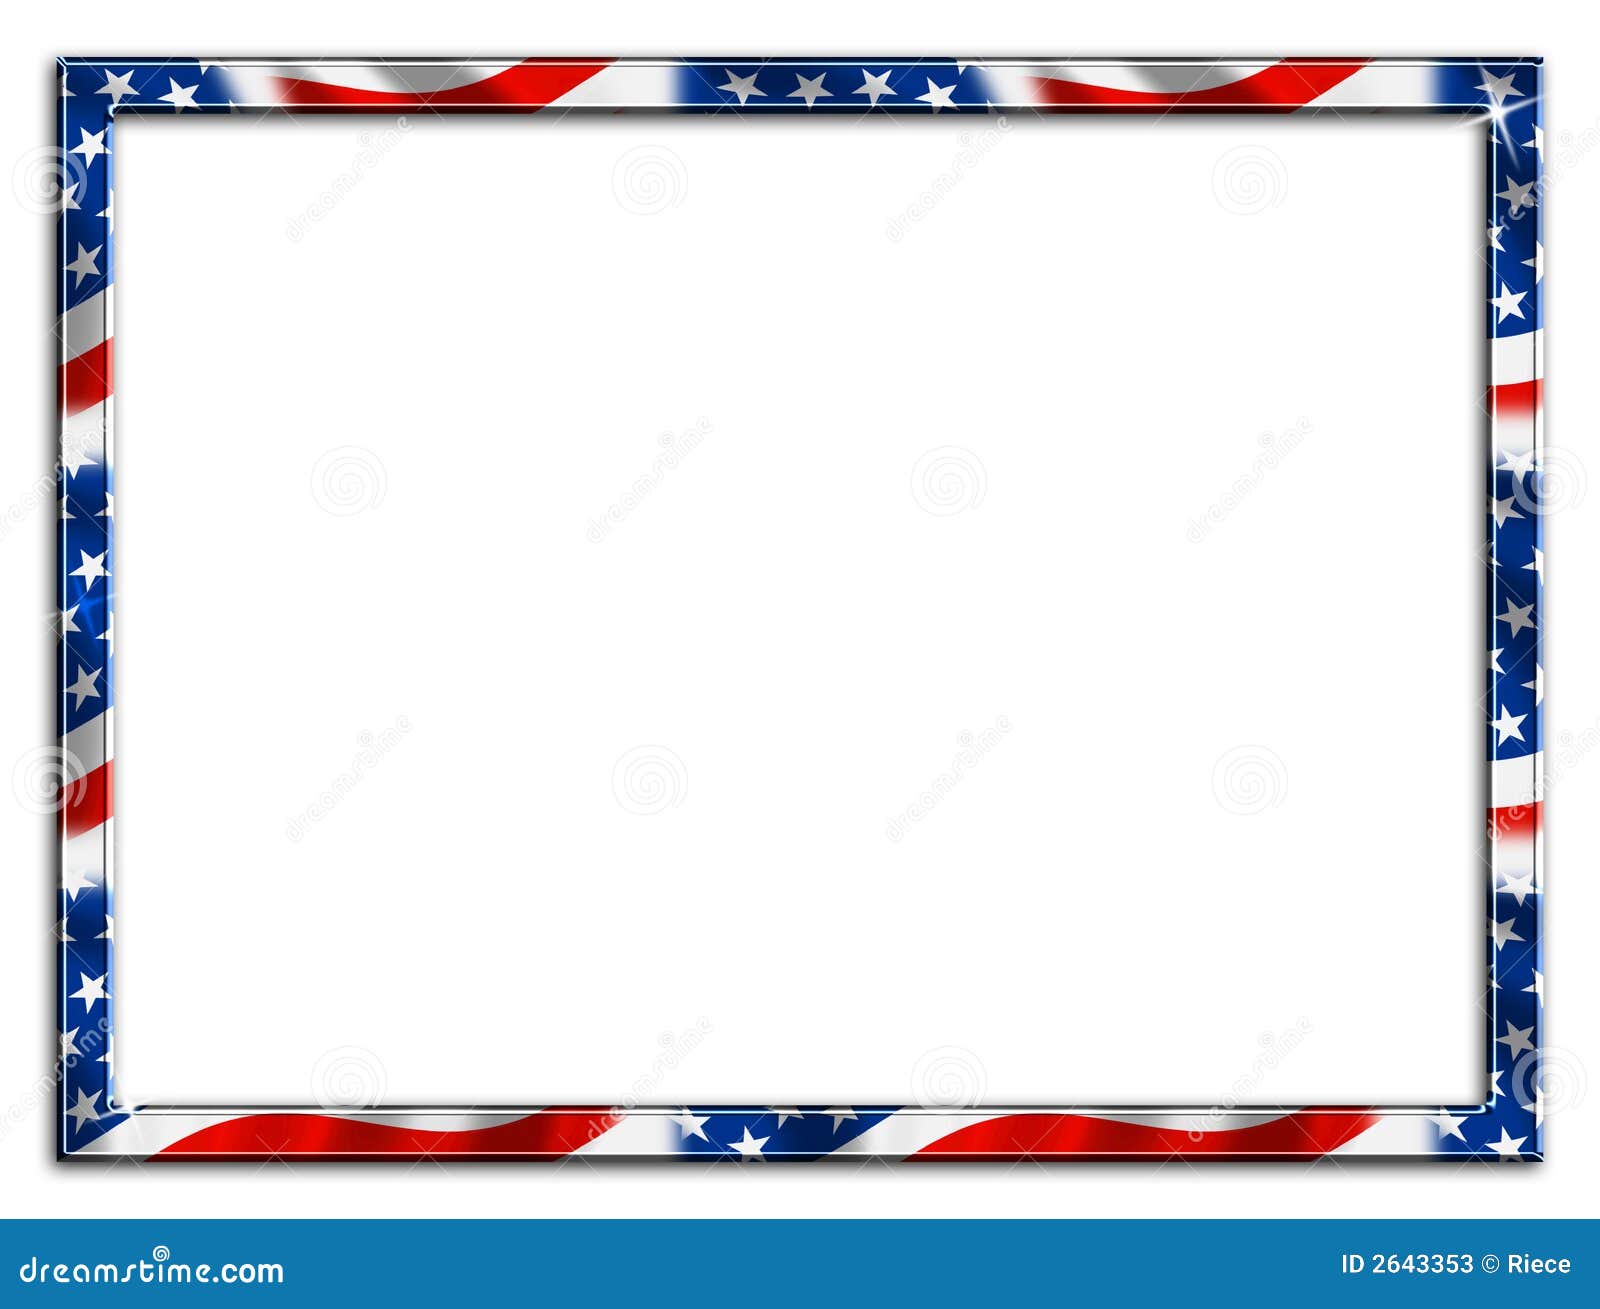 Red White and Blue Borders